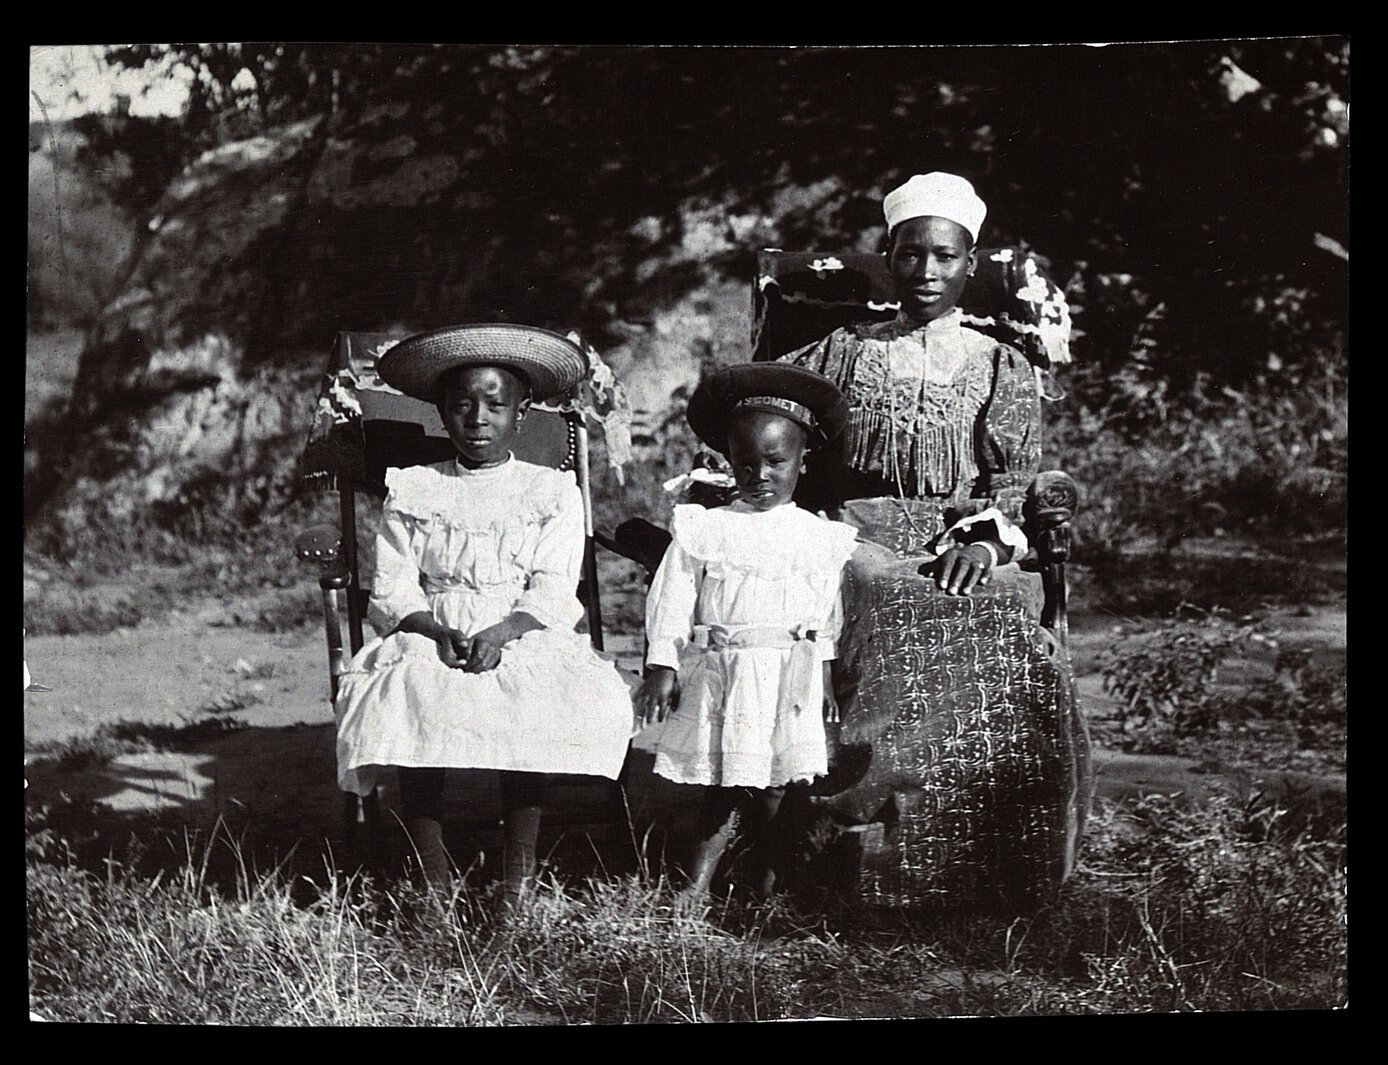 Semane Khama at right, seated, with two children, one of whom is standing, one of whom is seated.